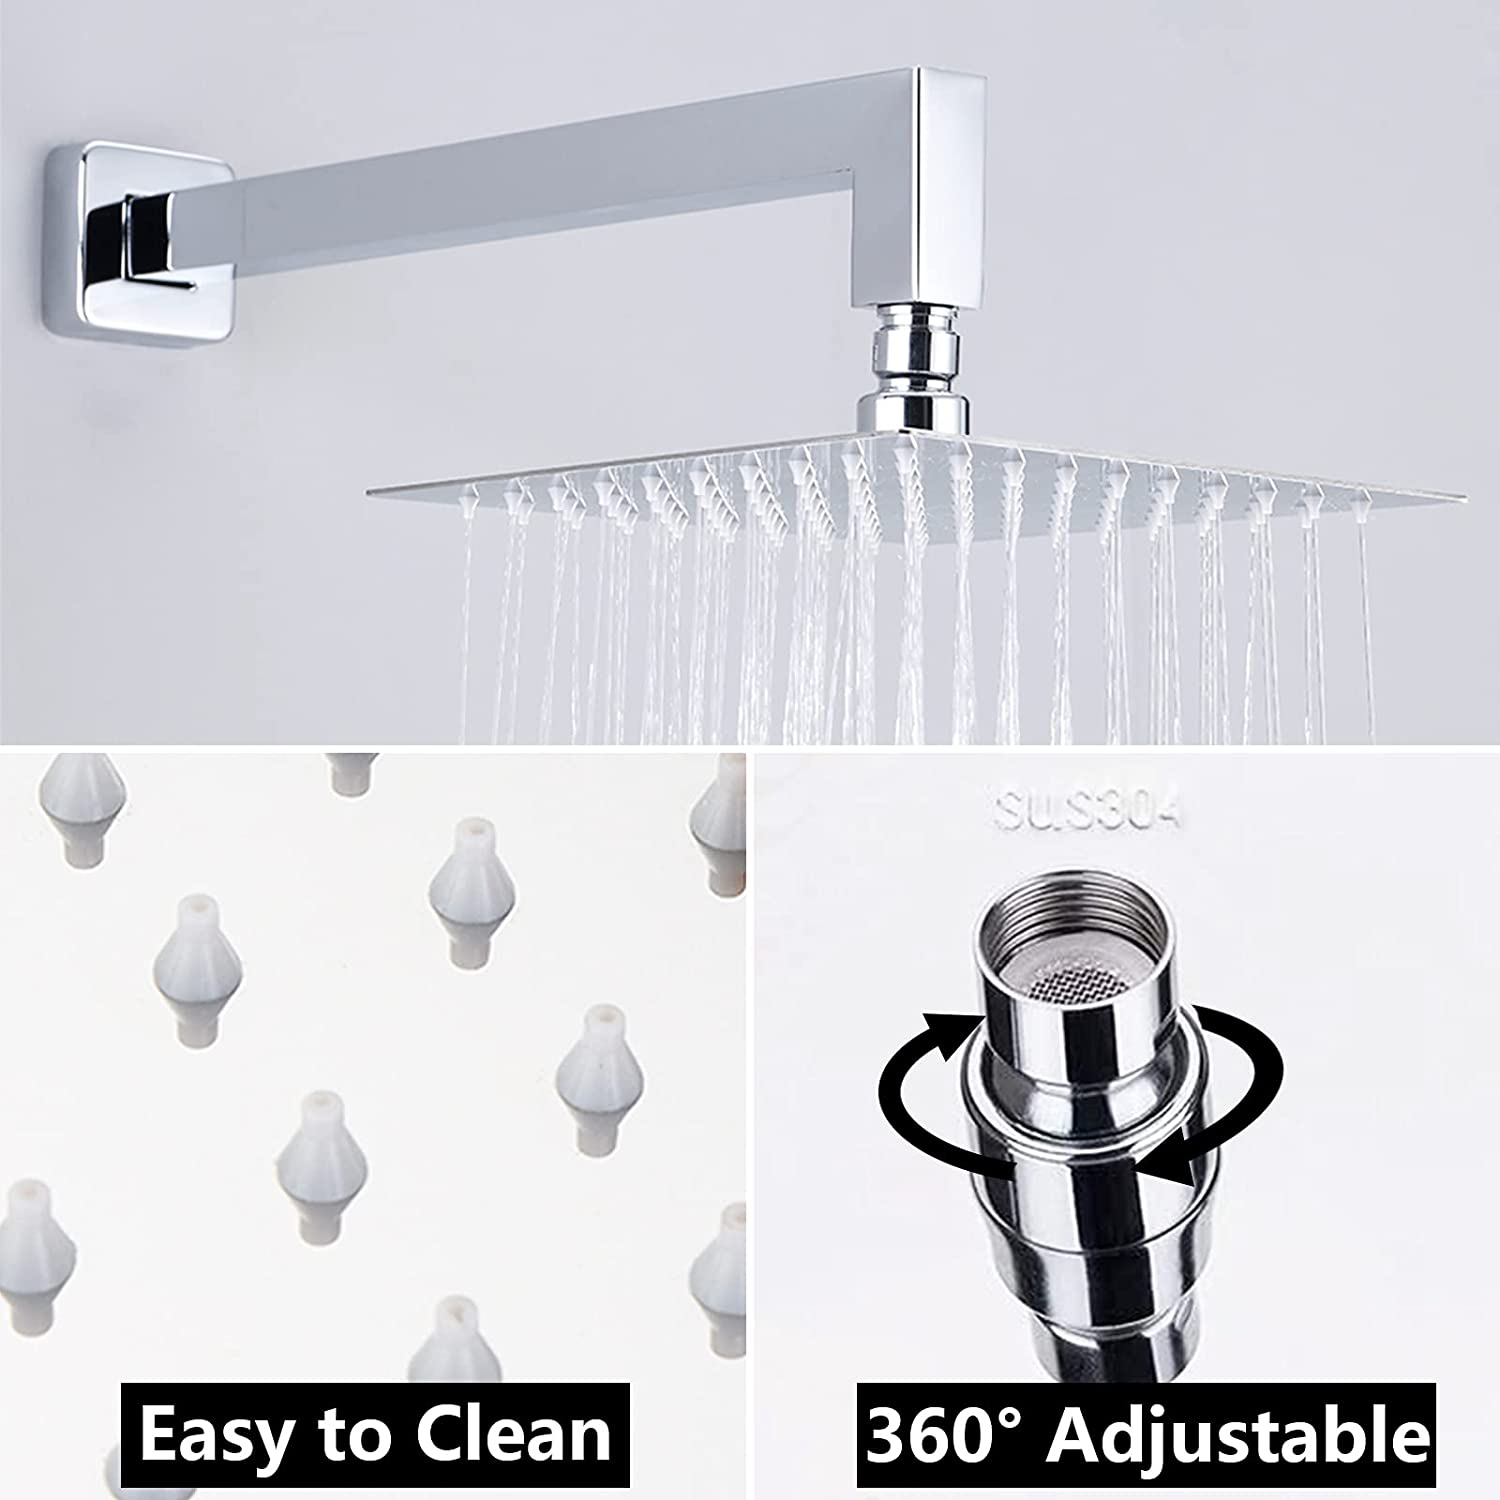 Aquacubic cUPC certified High Pressure Shower Trim Kits and Valve, with 8'' Square Shower Head, Brass Control Valve, and Tub Spout